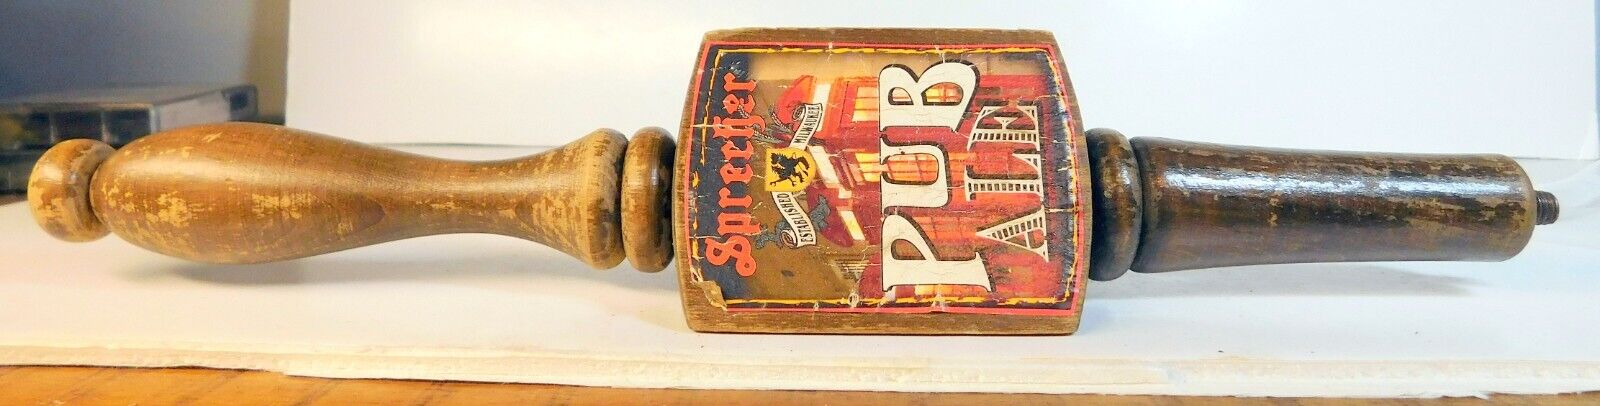 Sprecher Pub Ale Wooden Tap Handle 13" Tall 3 Faced Milwaukee Wisconsin